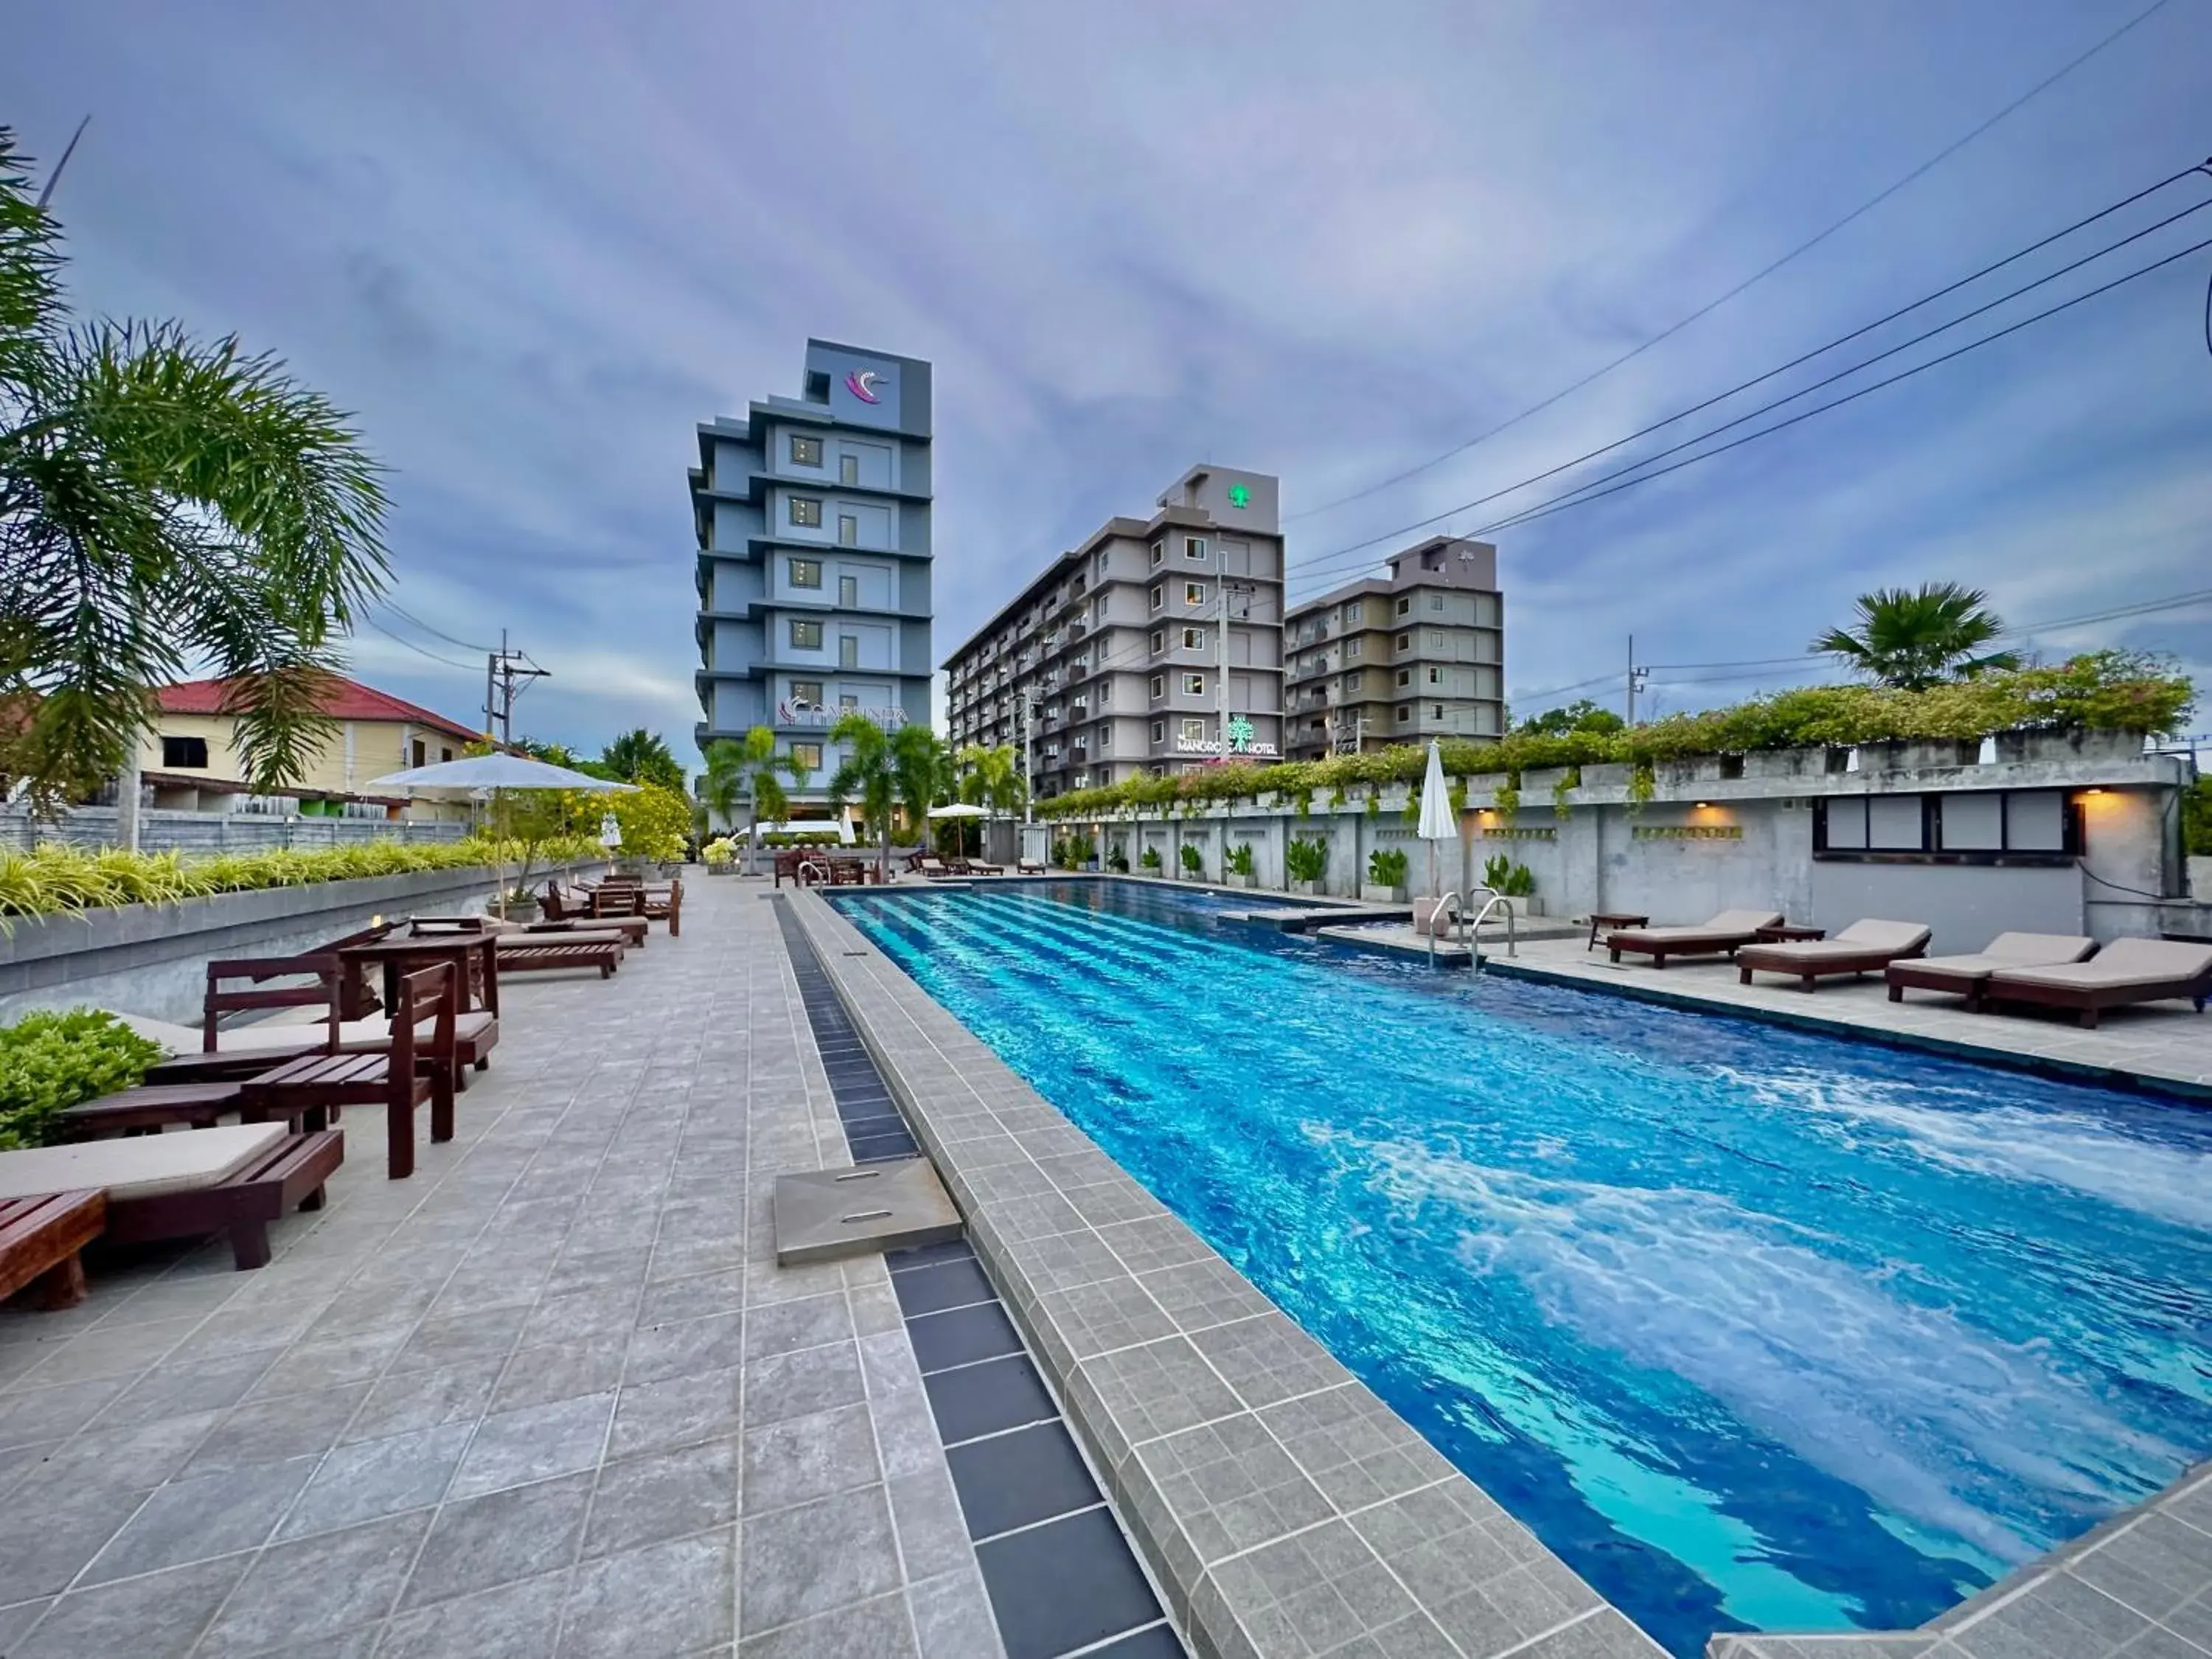 Property building, Swimming Pool in The Mangrove Hotel